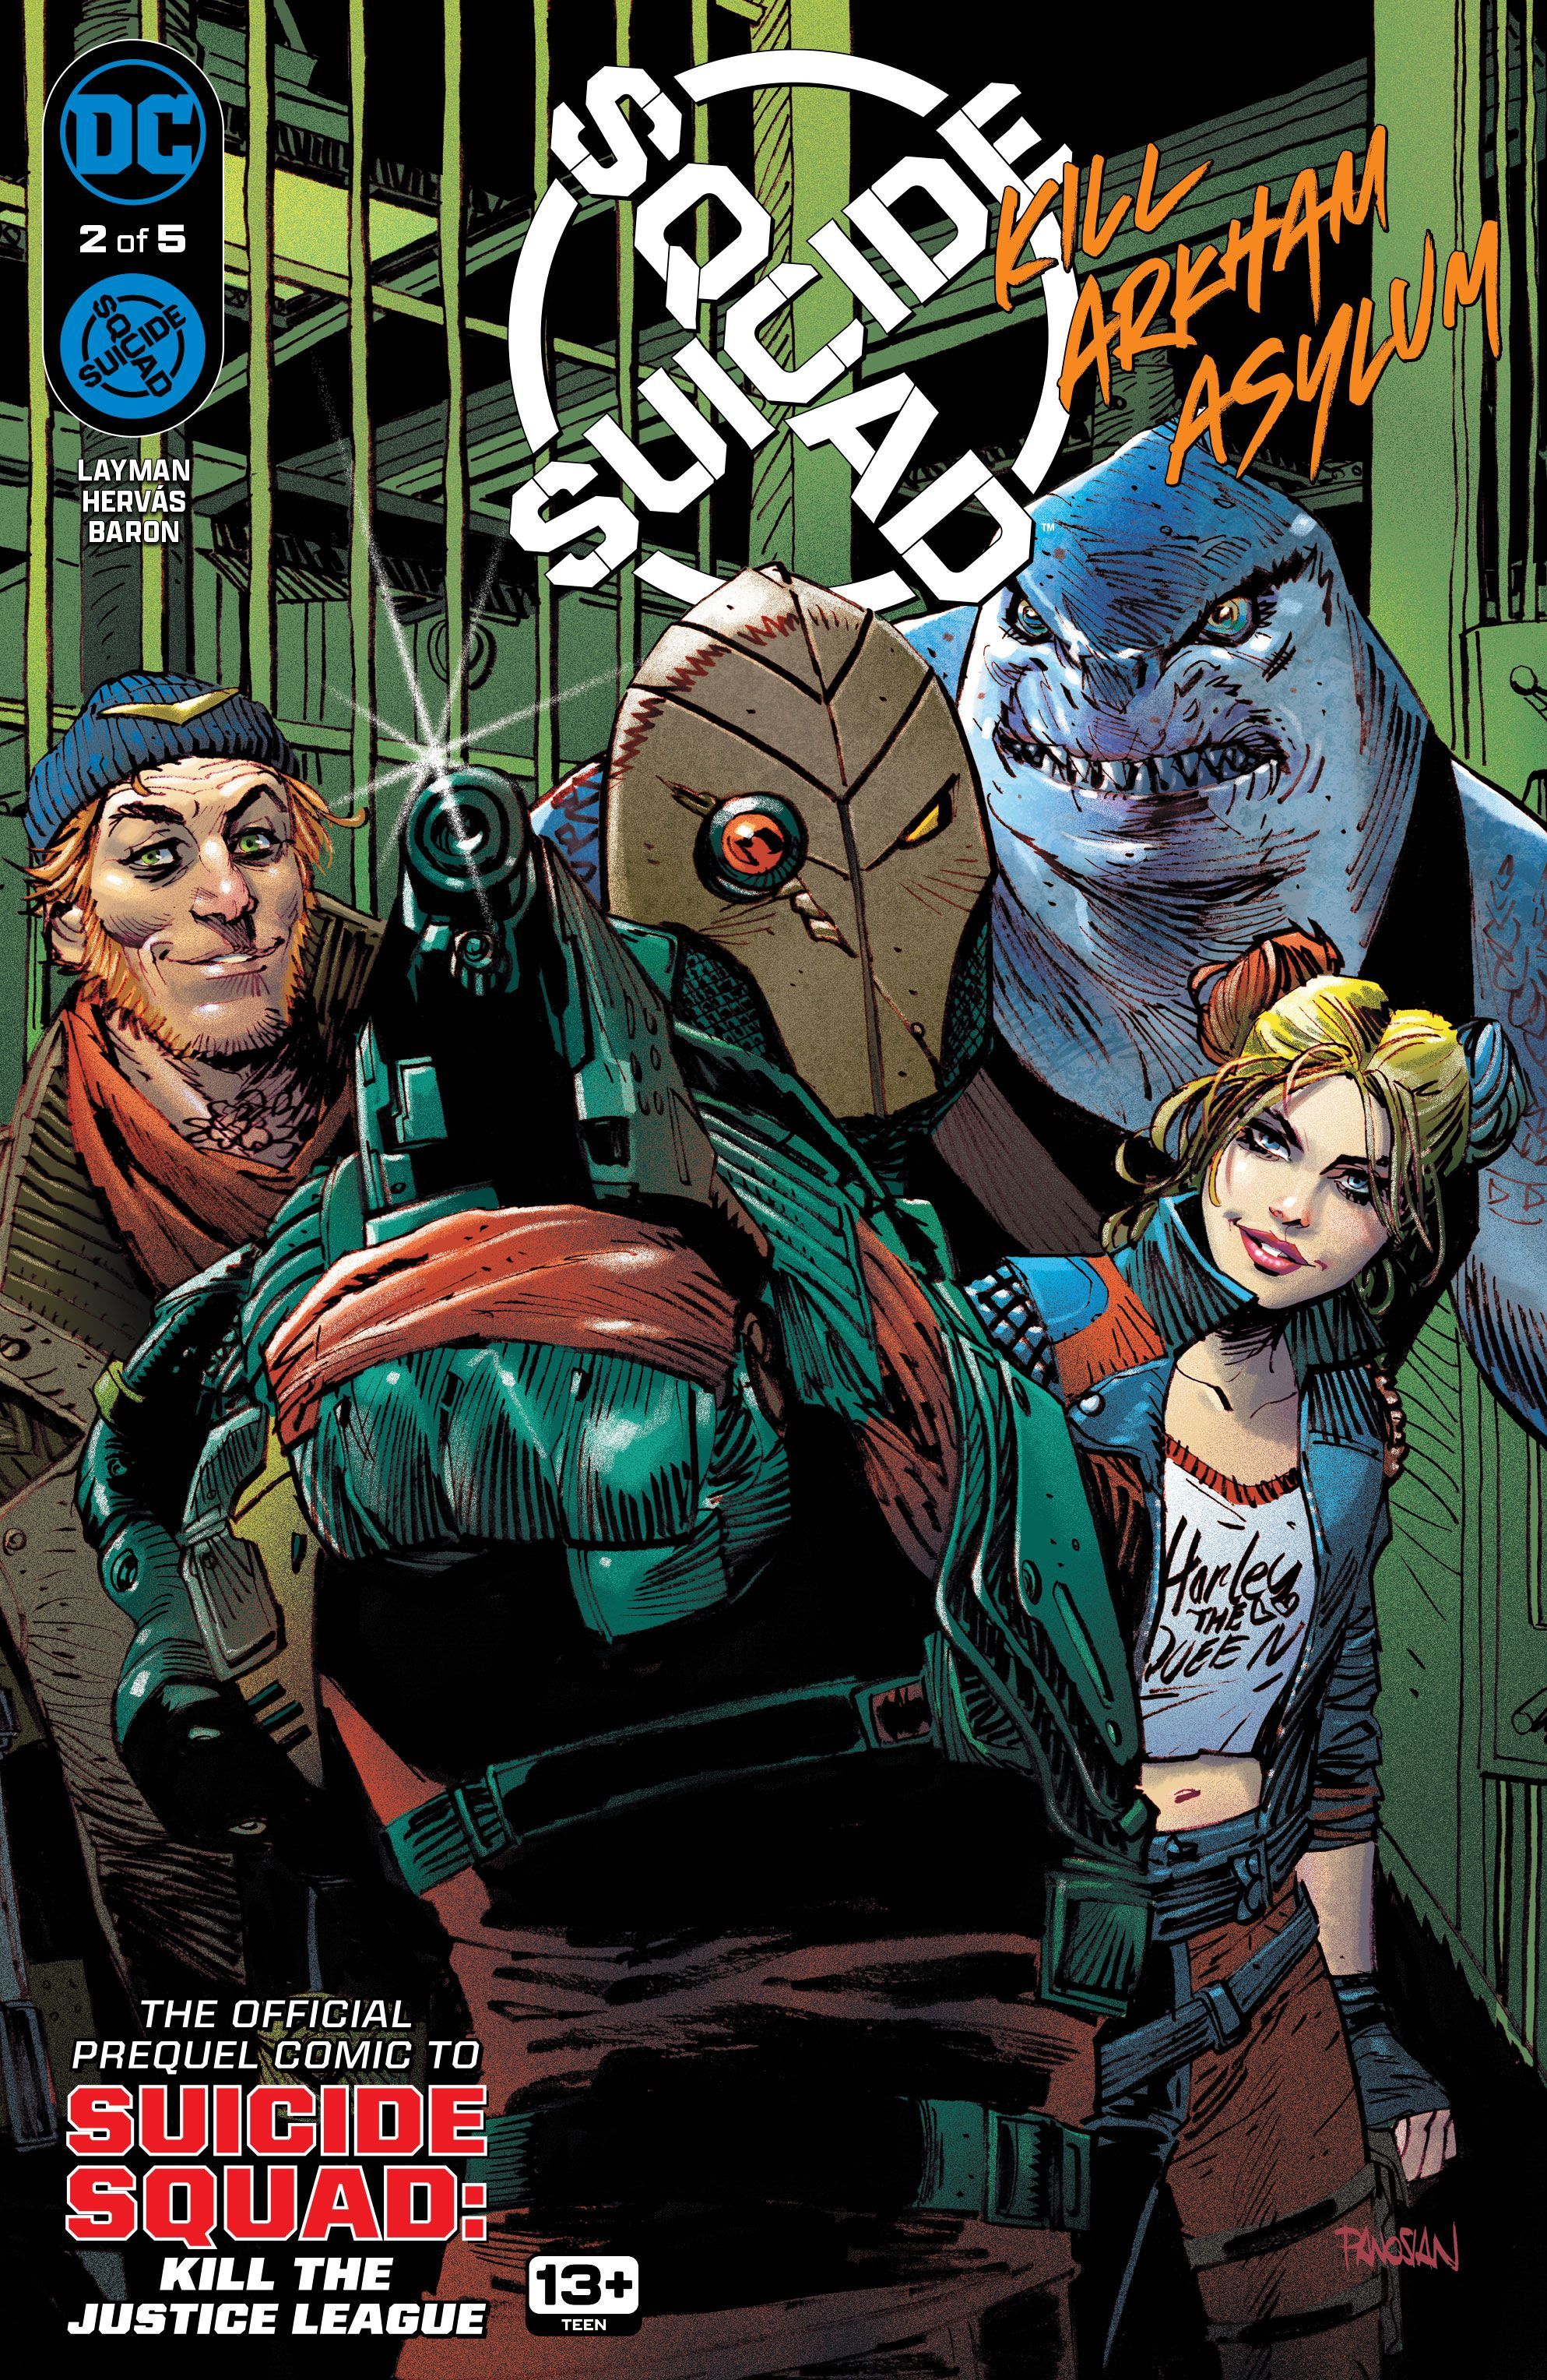 Suicide Squad Kill Arkham Asylum #2 cover featuring Harley Quinn, King Shark, Captain Bommerang, and Deadshot